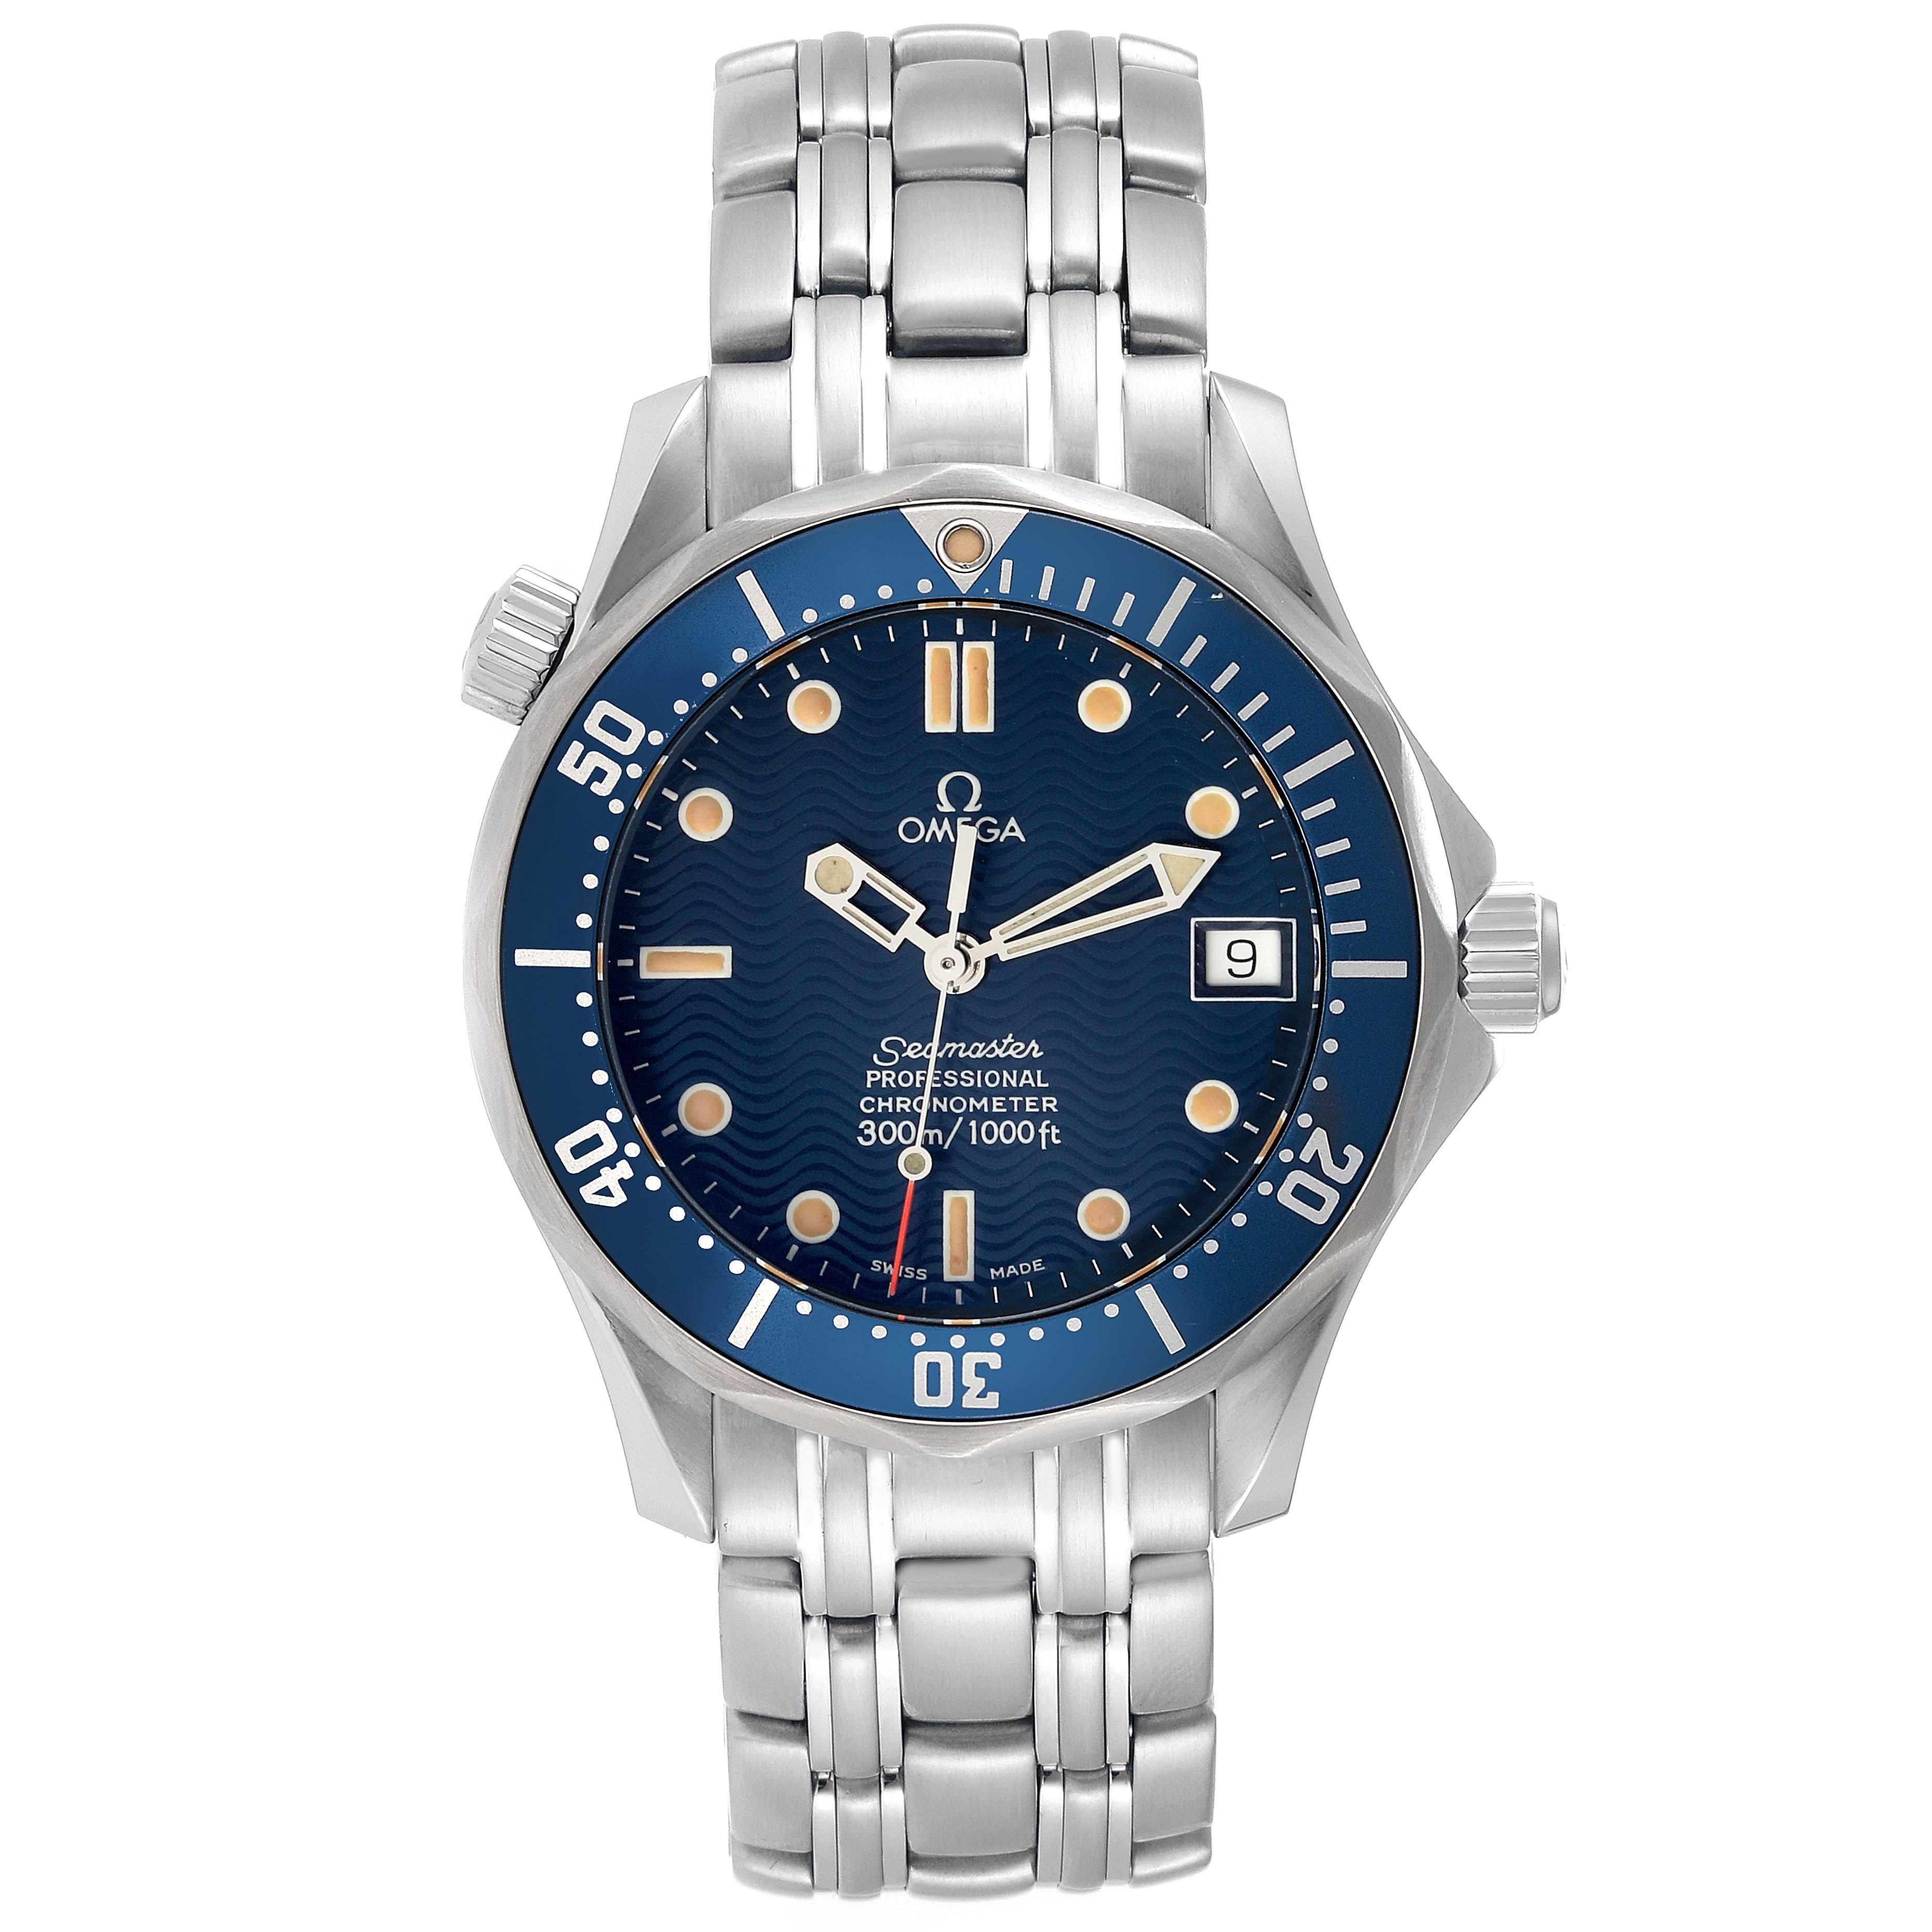 Omega Seamaster Diver 300m Midsize 36mm Steel Automatic Mens Watch 2551.80.00. Automatic self-winding movement. Stainless steel case 36.25 mm in diameter. Omega logo on the crown. Stainless steel blue unidirectional rotating diver's bezel. Scratch